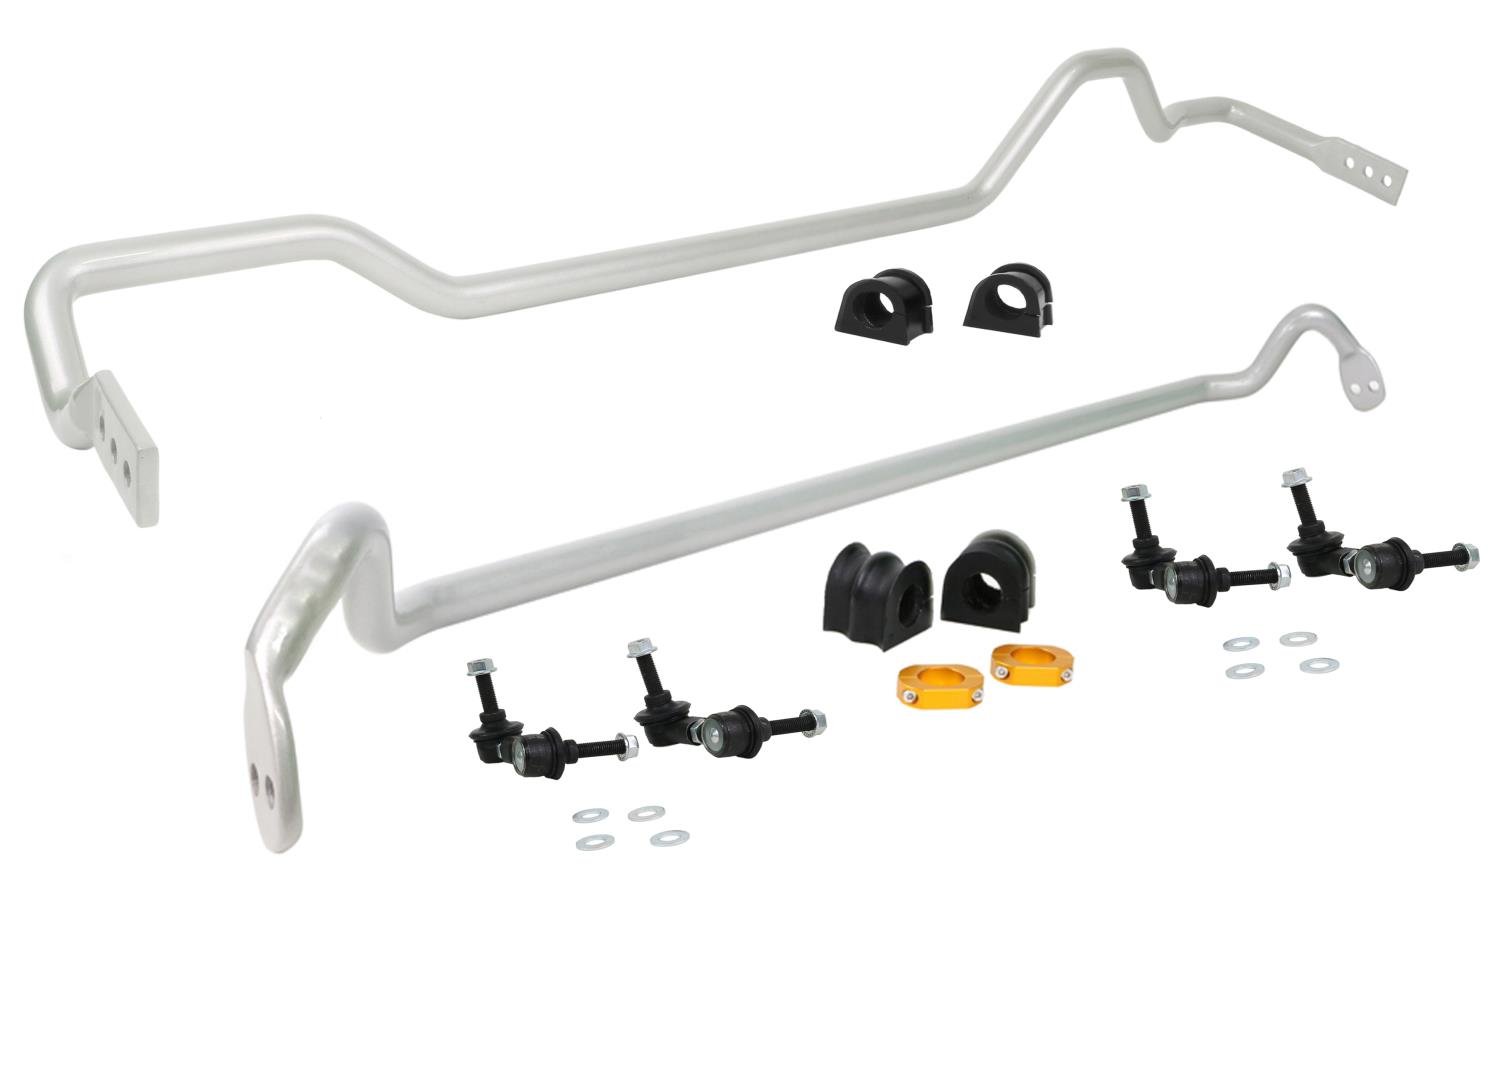 BSK010 Front and Rear Sway Bar Assembly Kit for 2004-2005 and 2007 Subaru WRX Sti